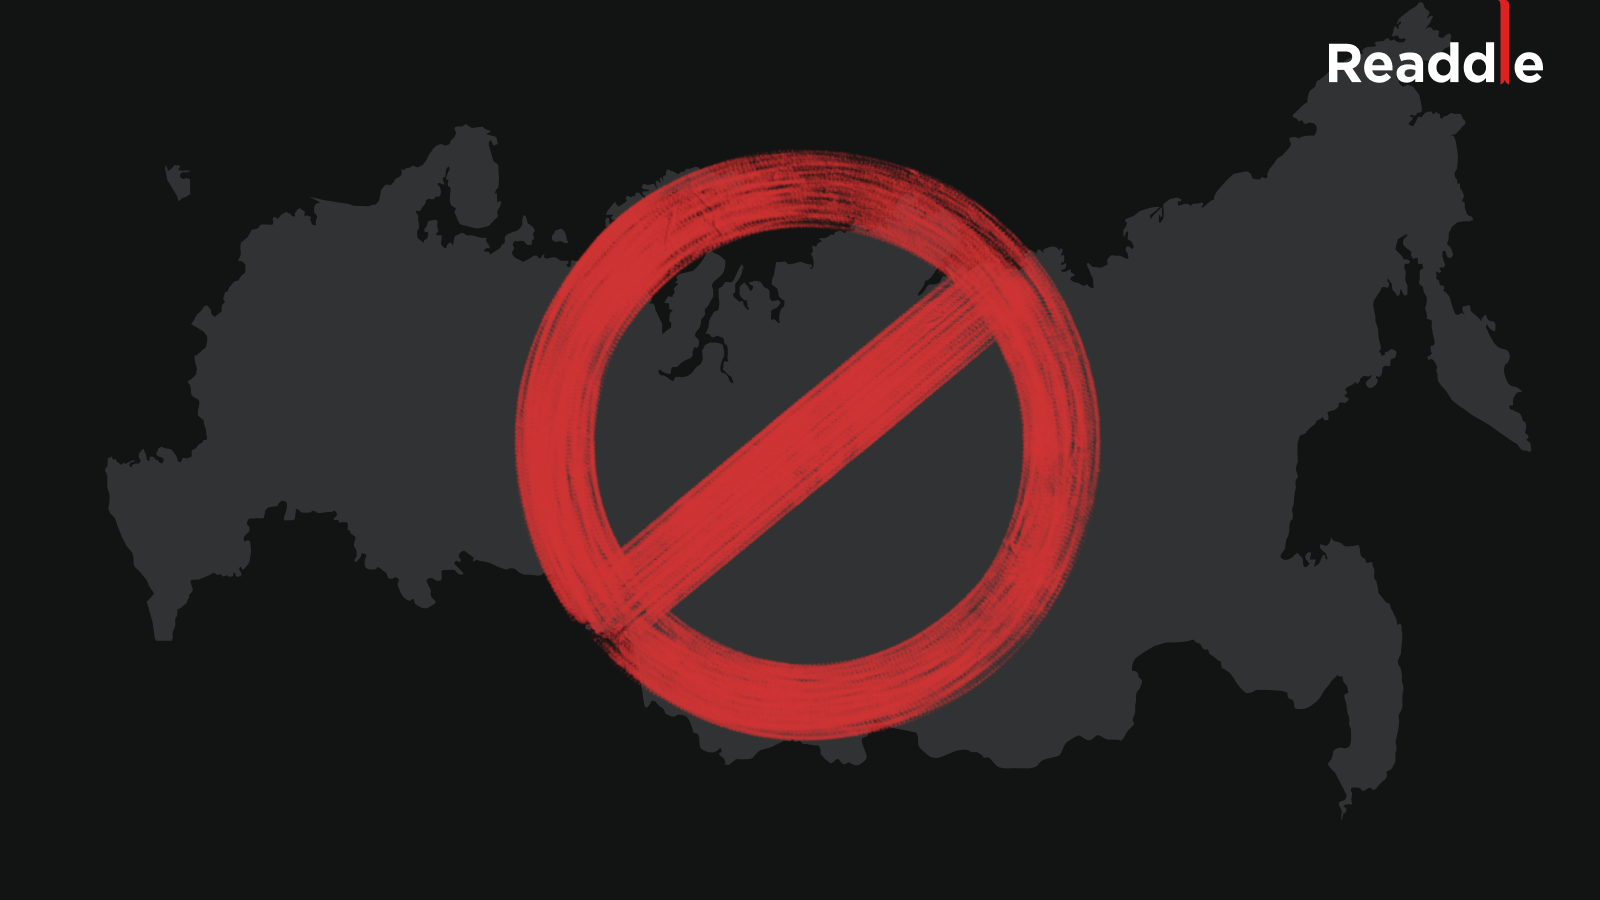 Teaser image featuring a red stop sign plastered over a map of Russia without Crimea, along with the Readdle logo in the top-right corner